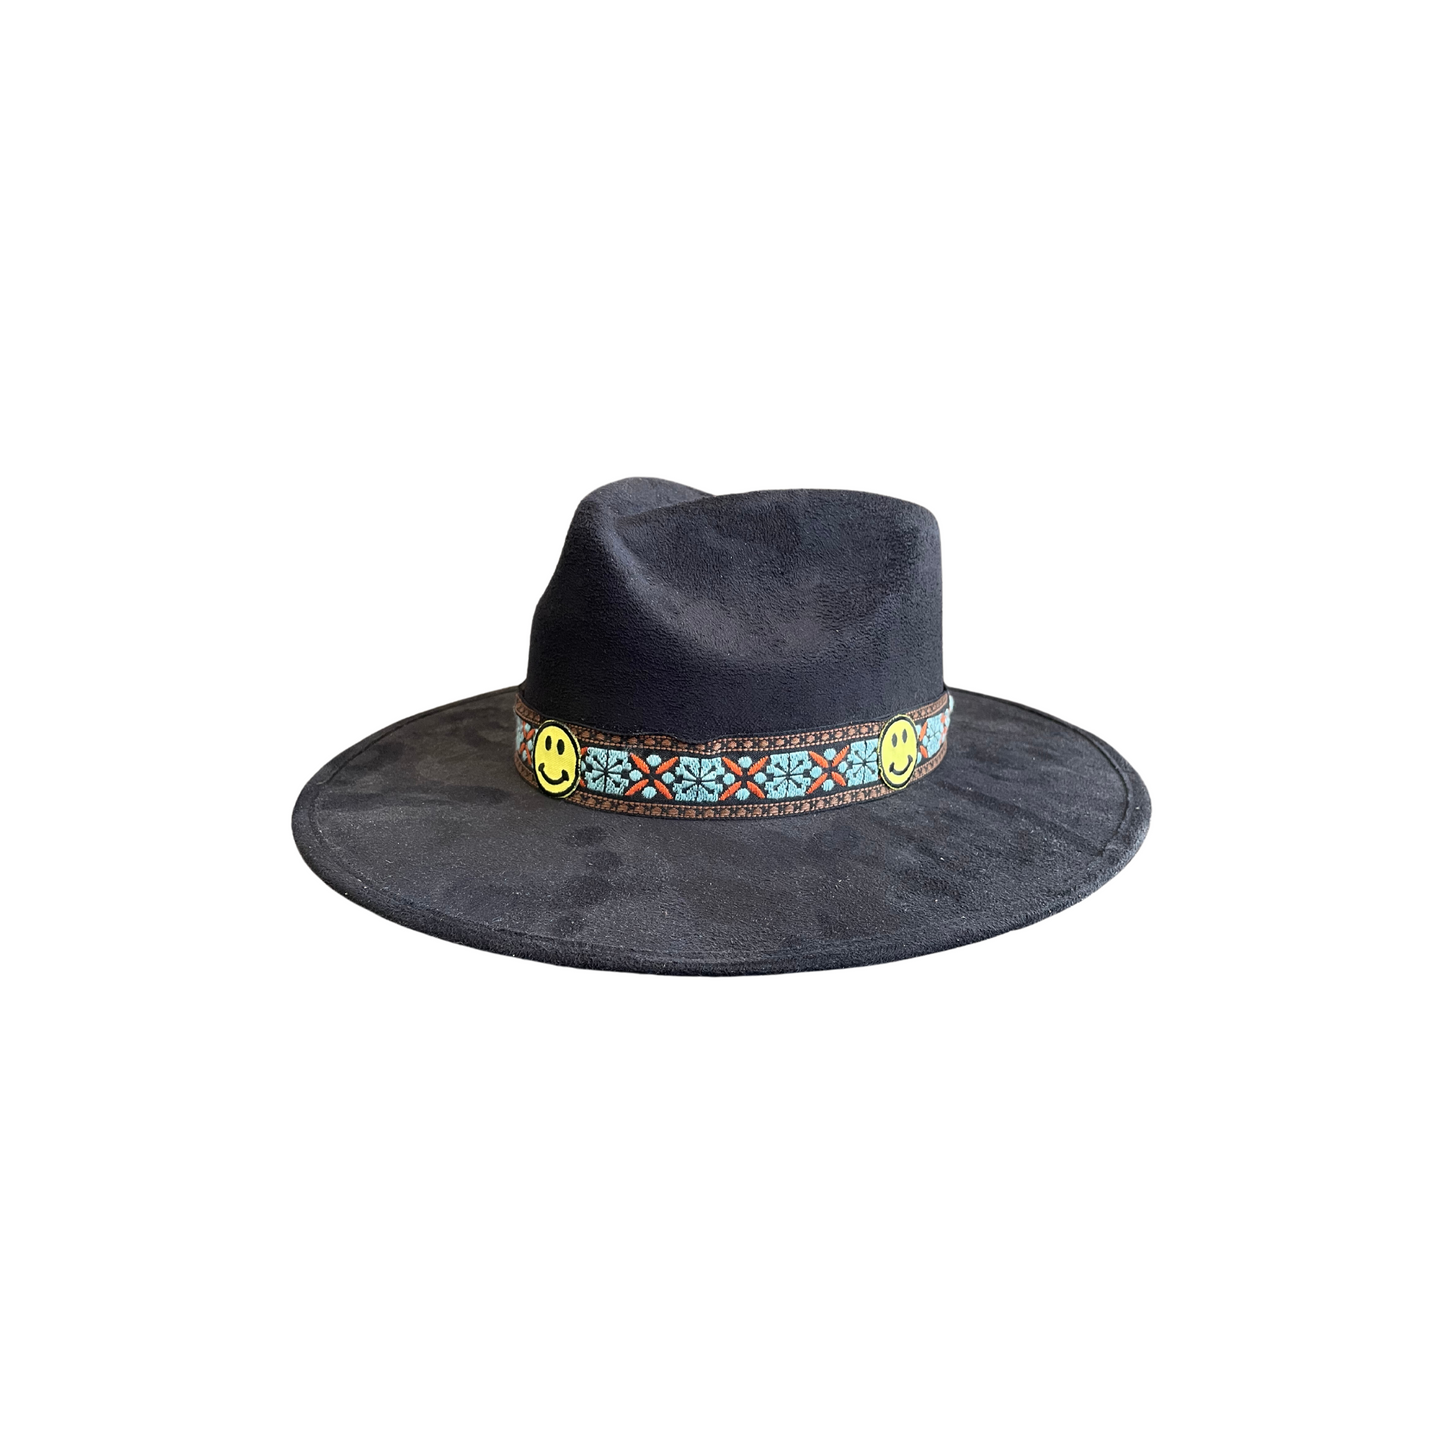 Black Crosstop Rancher with Smiley Face Hat Band